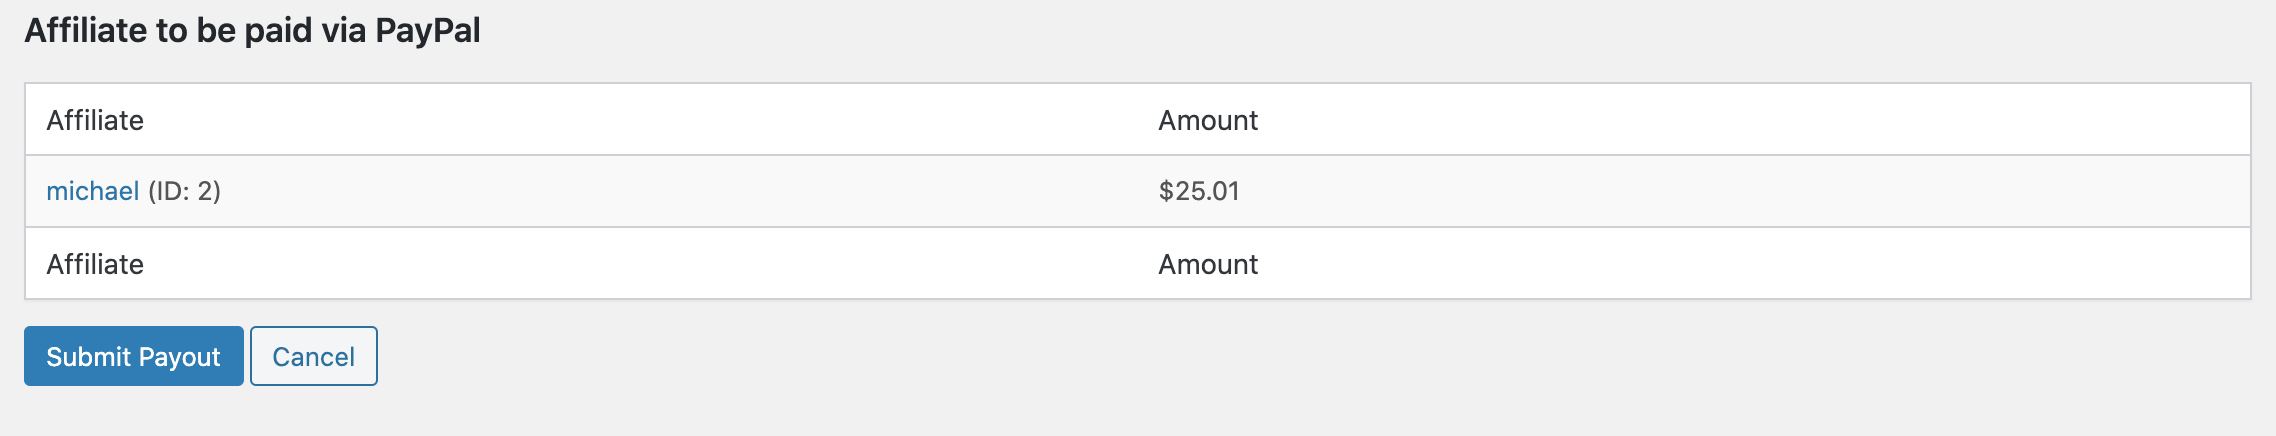 PayPal Payouts affiliates to be paid